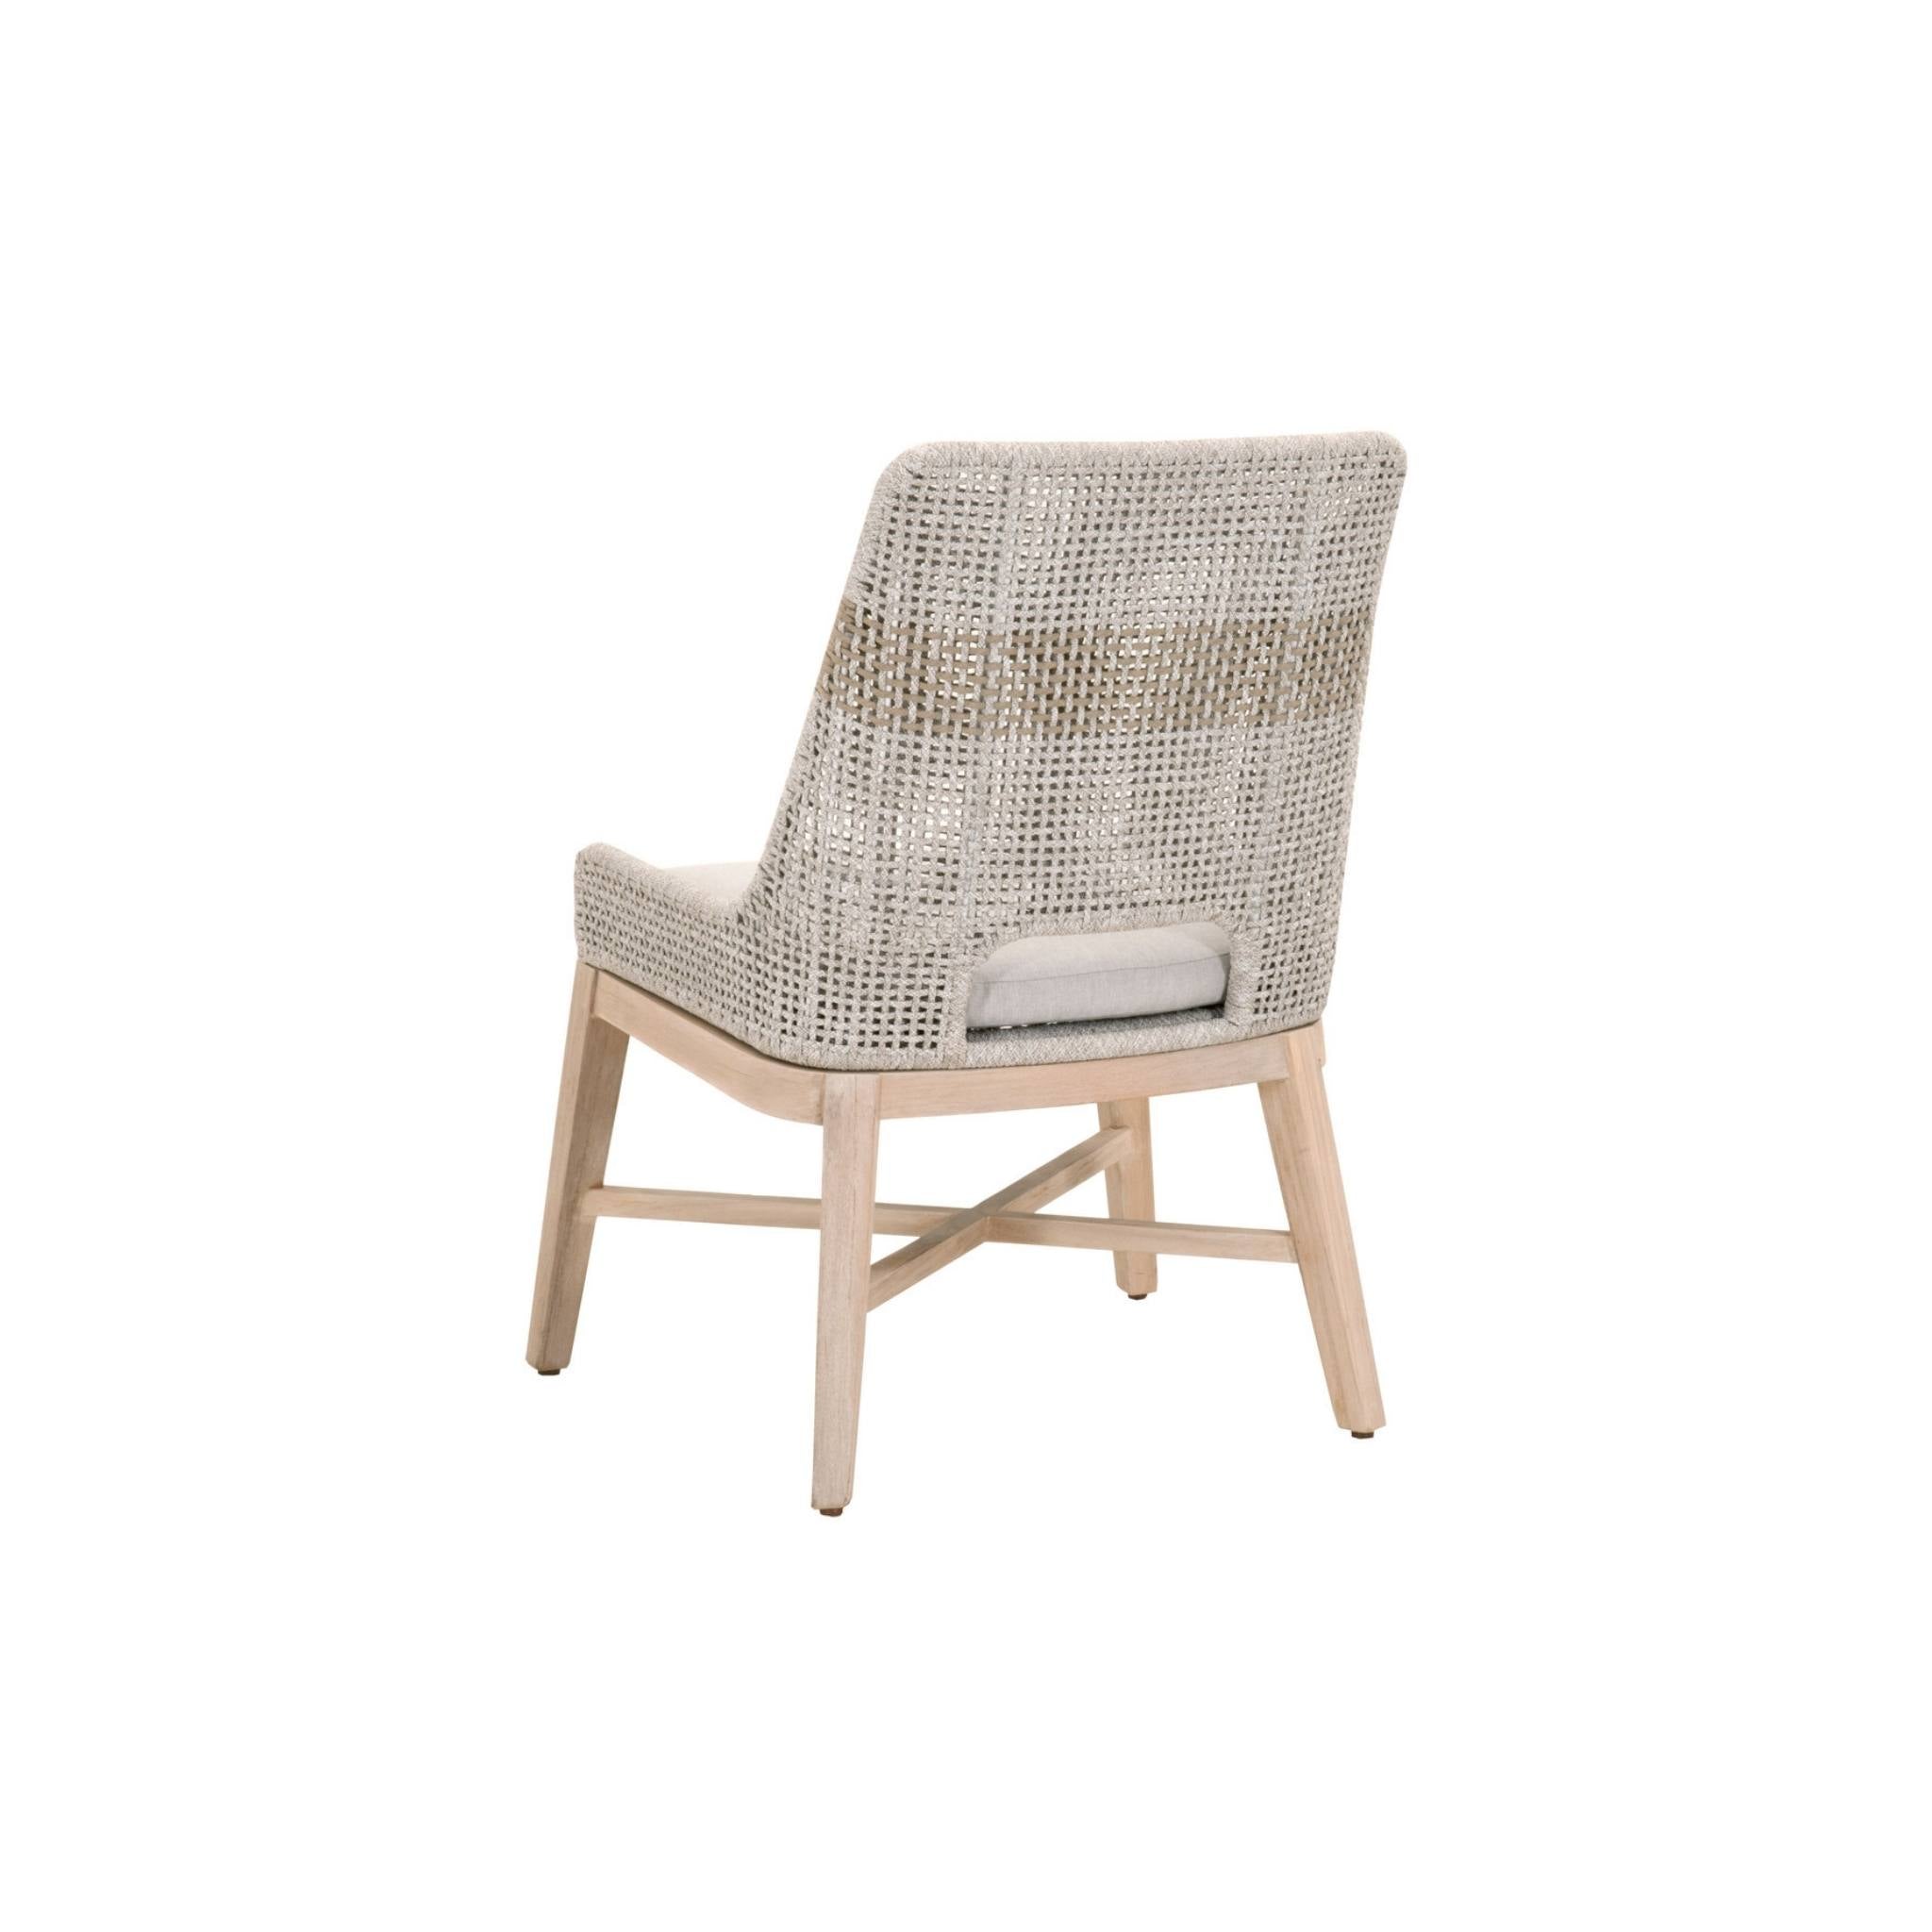 Reinach Outdoor Dining Chair - Set of 2